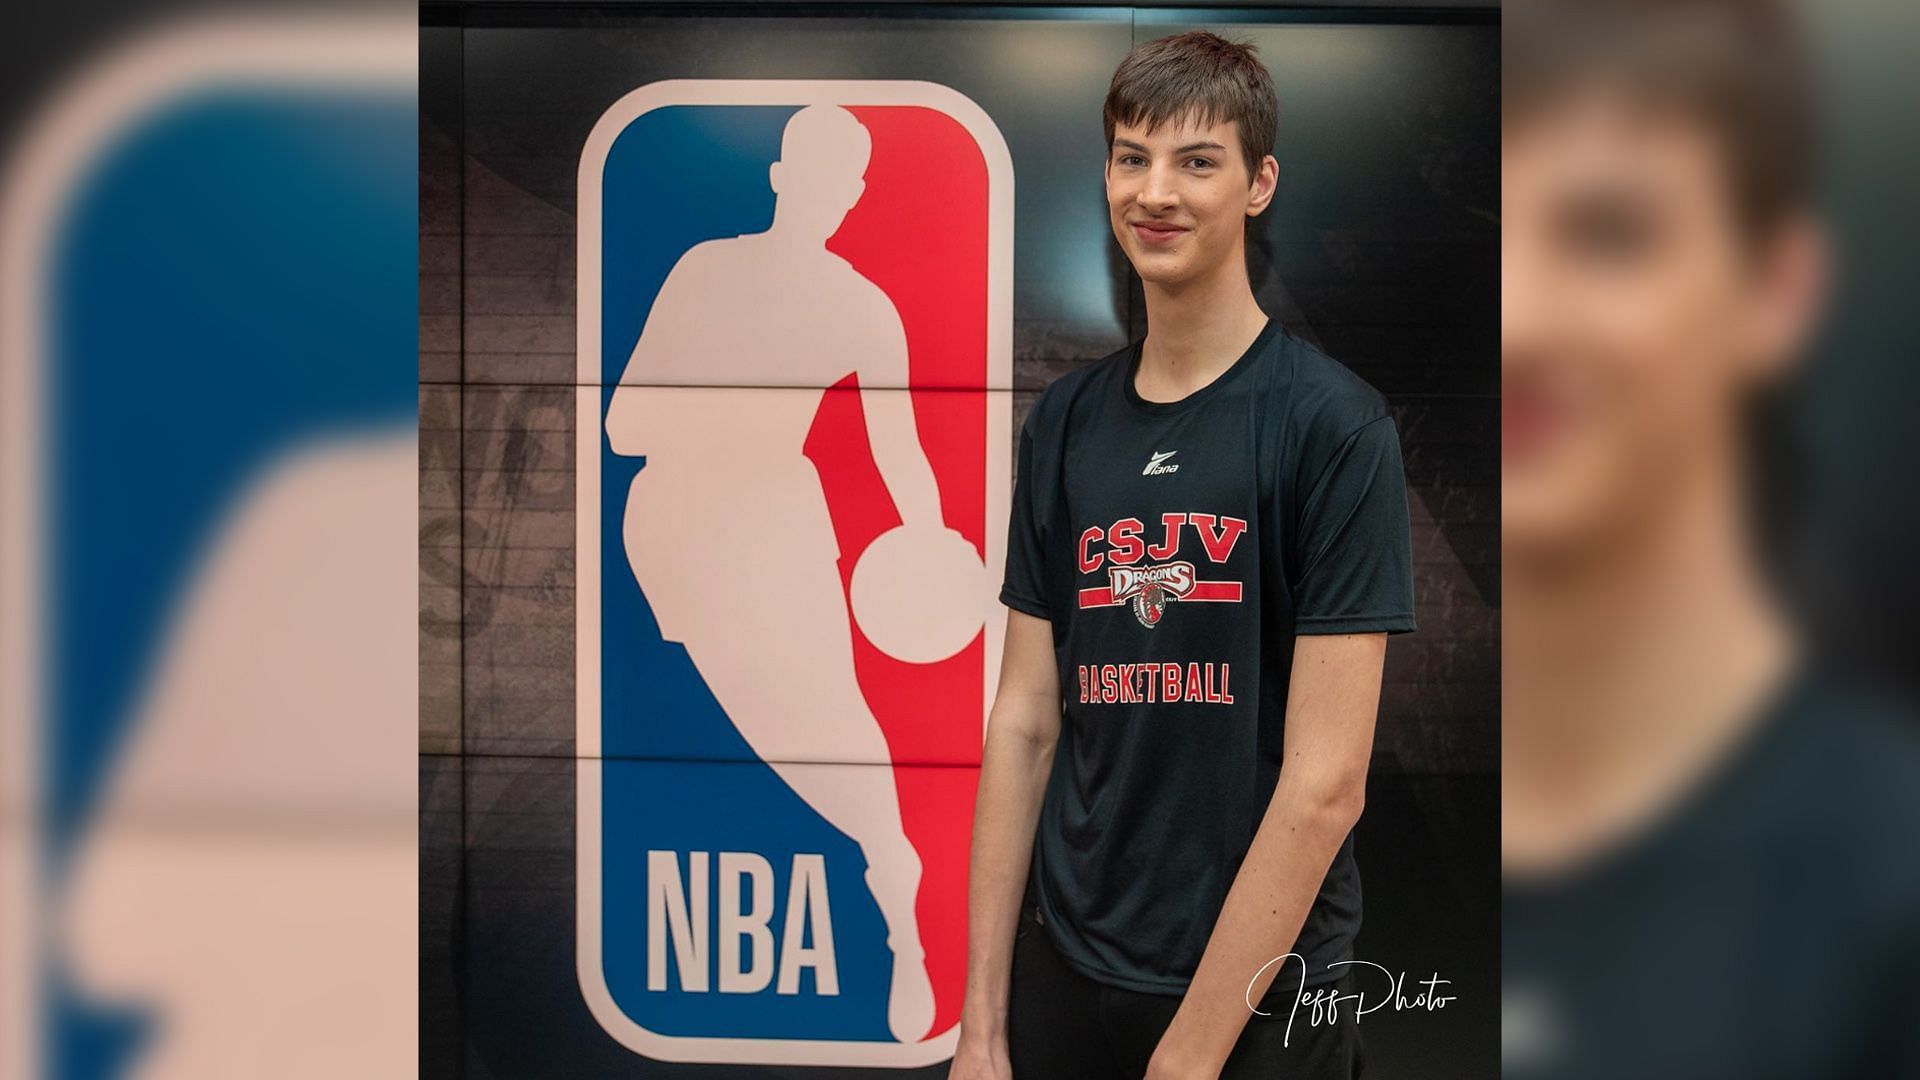 Olivier Rioux would love to make it to the NBA (Image via olivier.rioux)